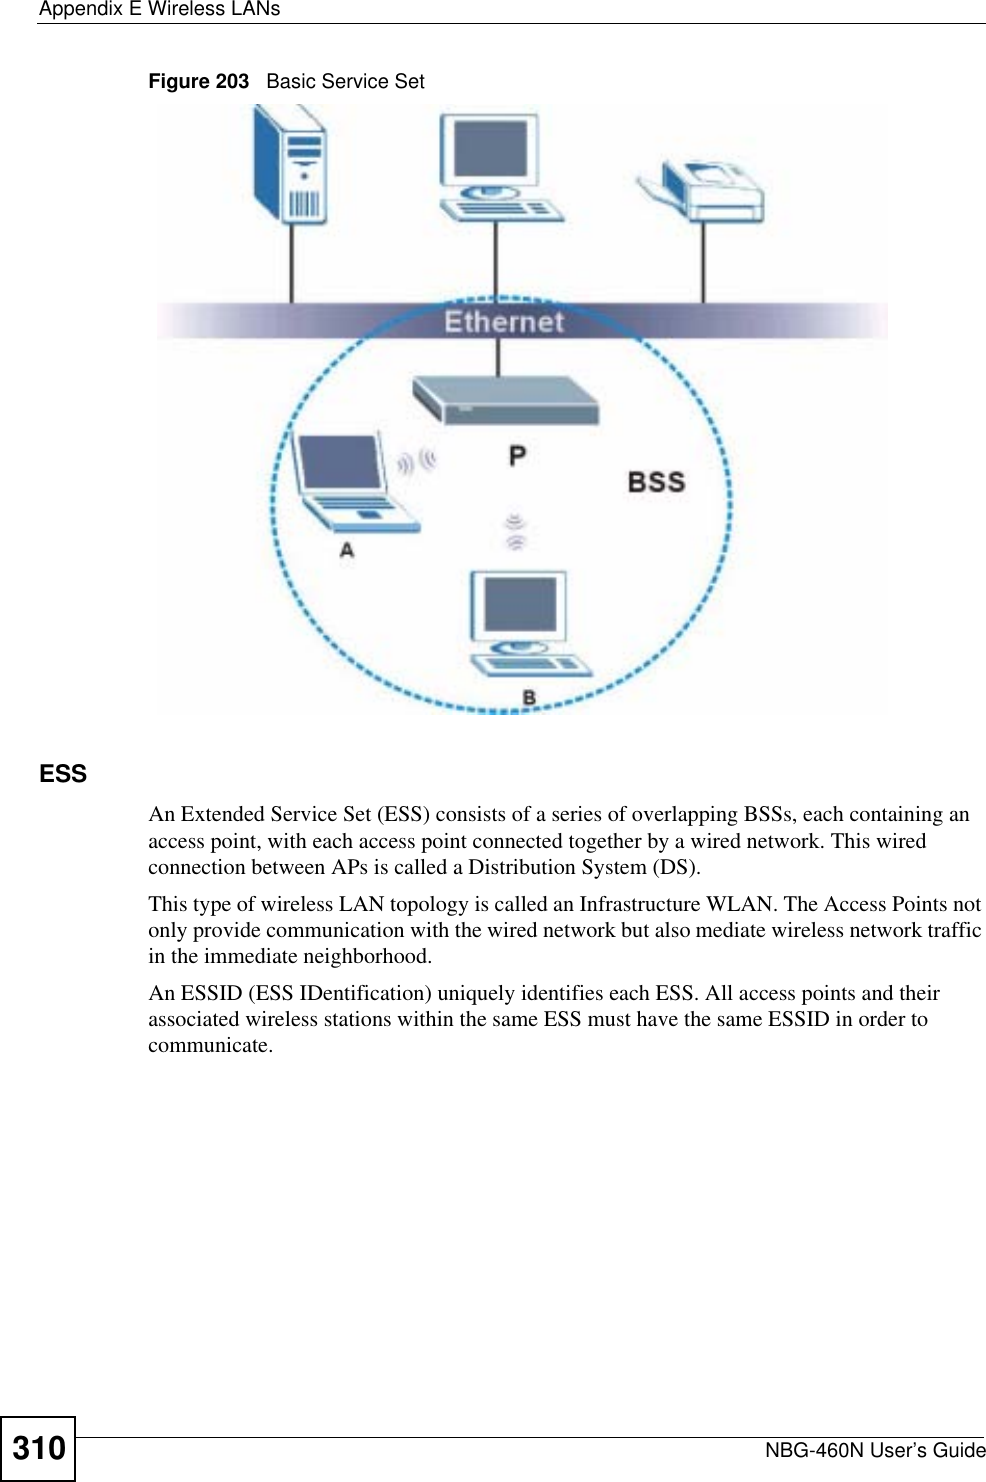 Appendix E Wireless LANsNBG-460N User’s Guide310Figure 203   Basic Service SetESSAn Extended Service Set (ESS) consists of a series of overlapping BSSs, each containing an access point, with each access point connected together by a wired network. This wired connection between APs is called a Distribution System (DS).This type of wireless LAN topology is called an Infrastructure WLAN. The Access Points not only provide communication with the wired network but also mediate wireless network traffic in the immediate neighborhood. An ESSID (ESS IDentification) uniquely identifies each ESS. All access points and their associated wireless stations within the same ESS must have the same ESSID in order to communicate.